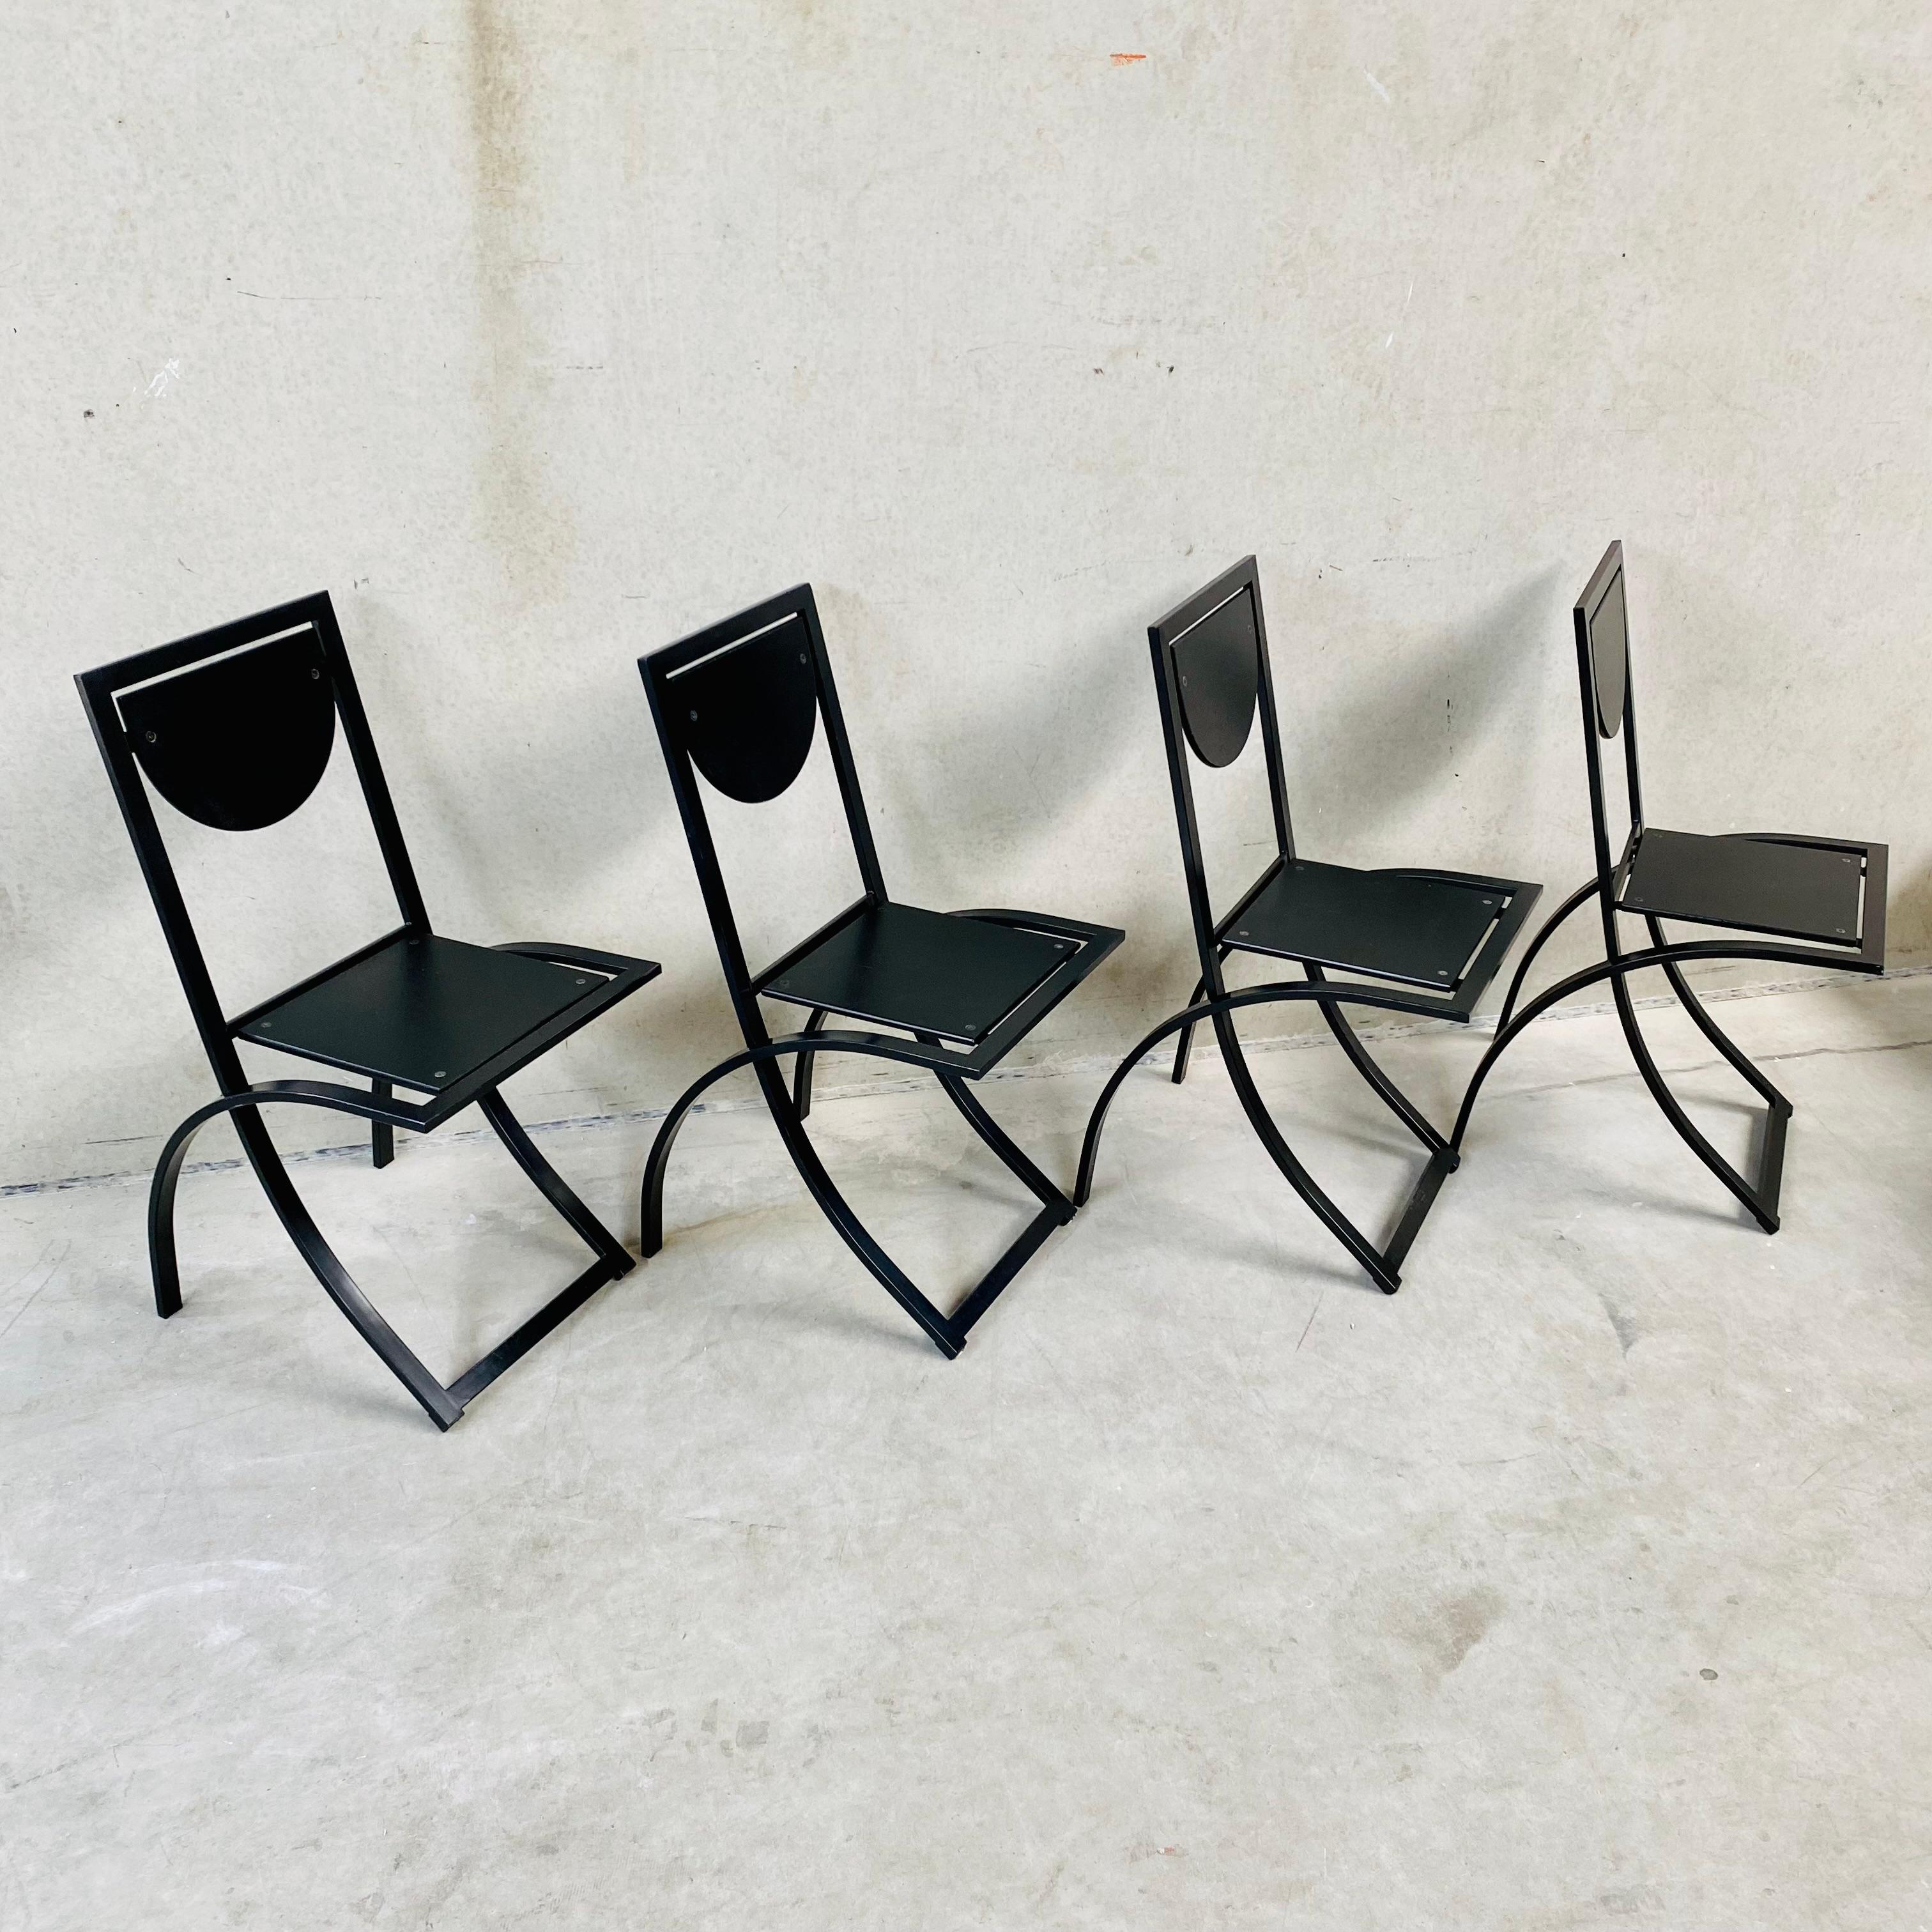 4 x KFF Black Smoked Oak Dining Chairs by Karl Friedrich Förster 1980 For Sale 5